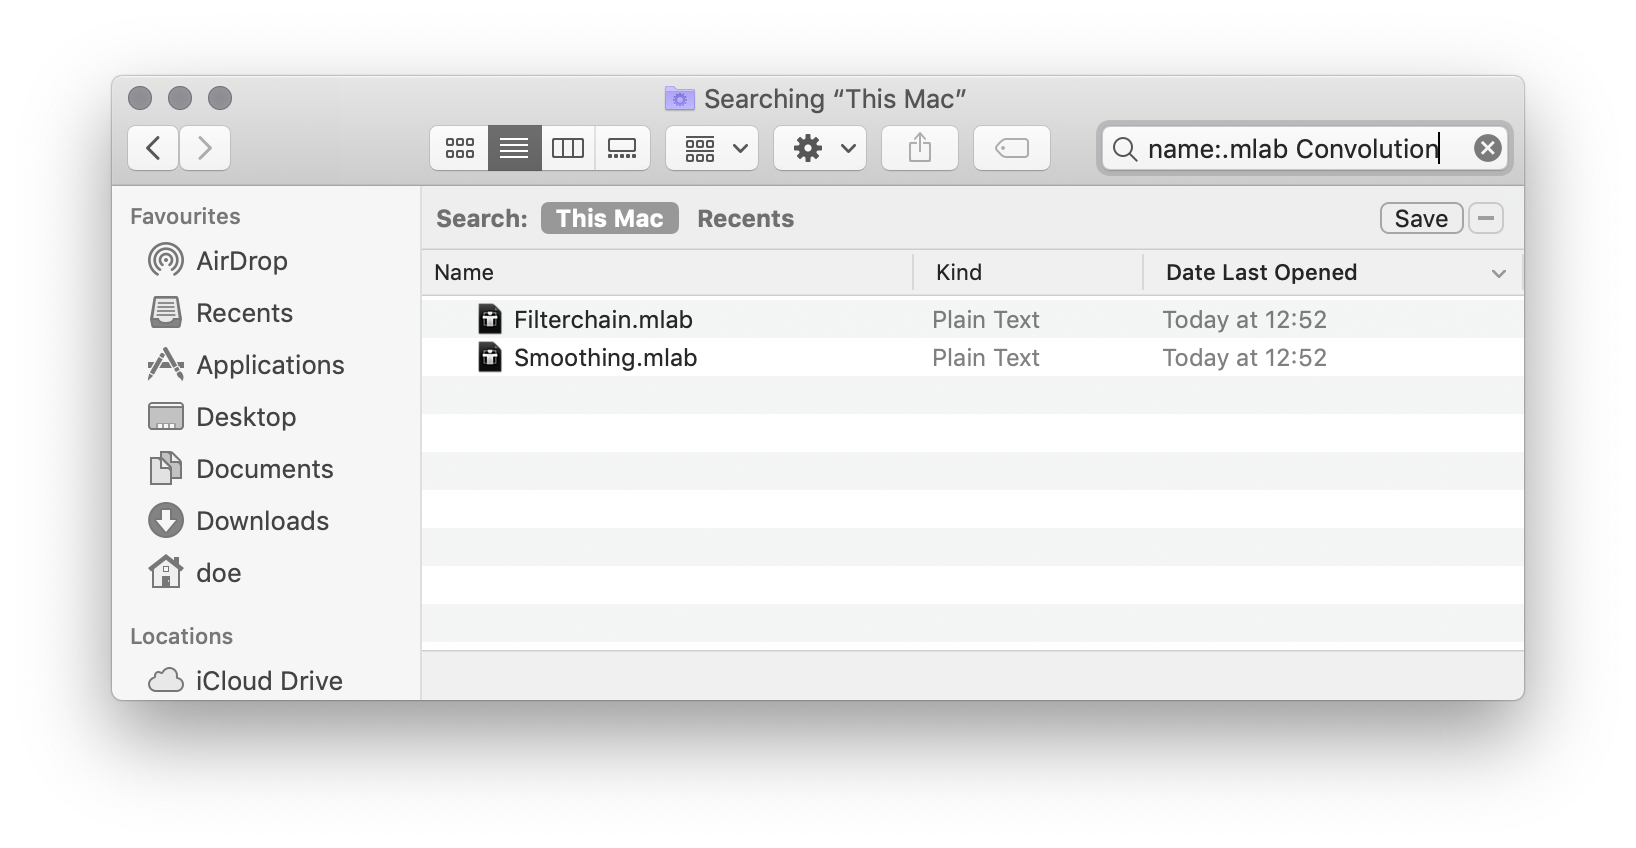 Searching all Network documents with a Convolution Module in Finder